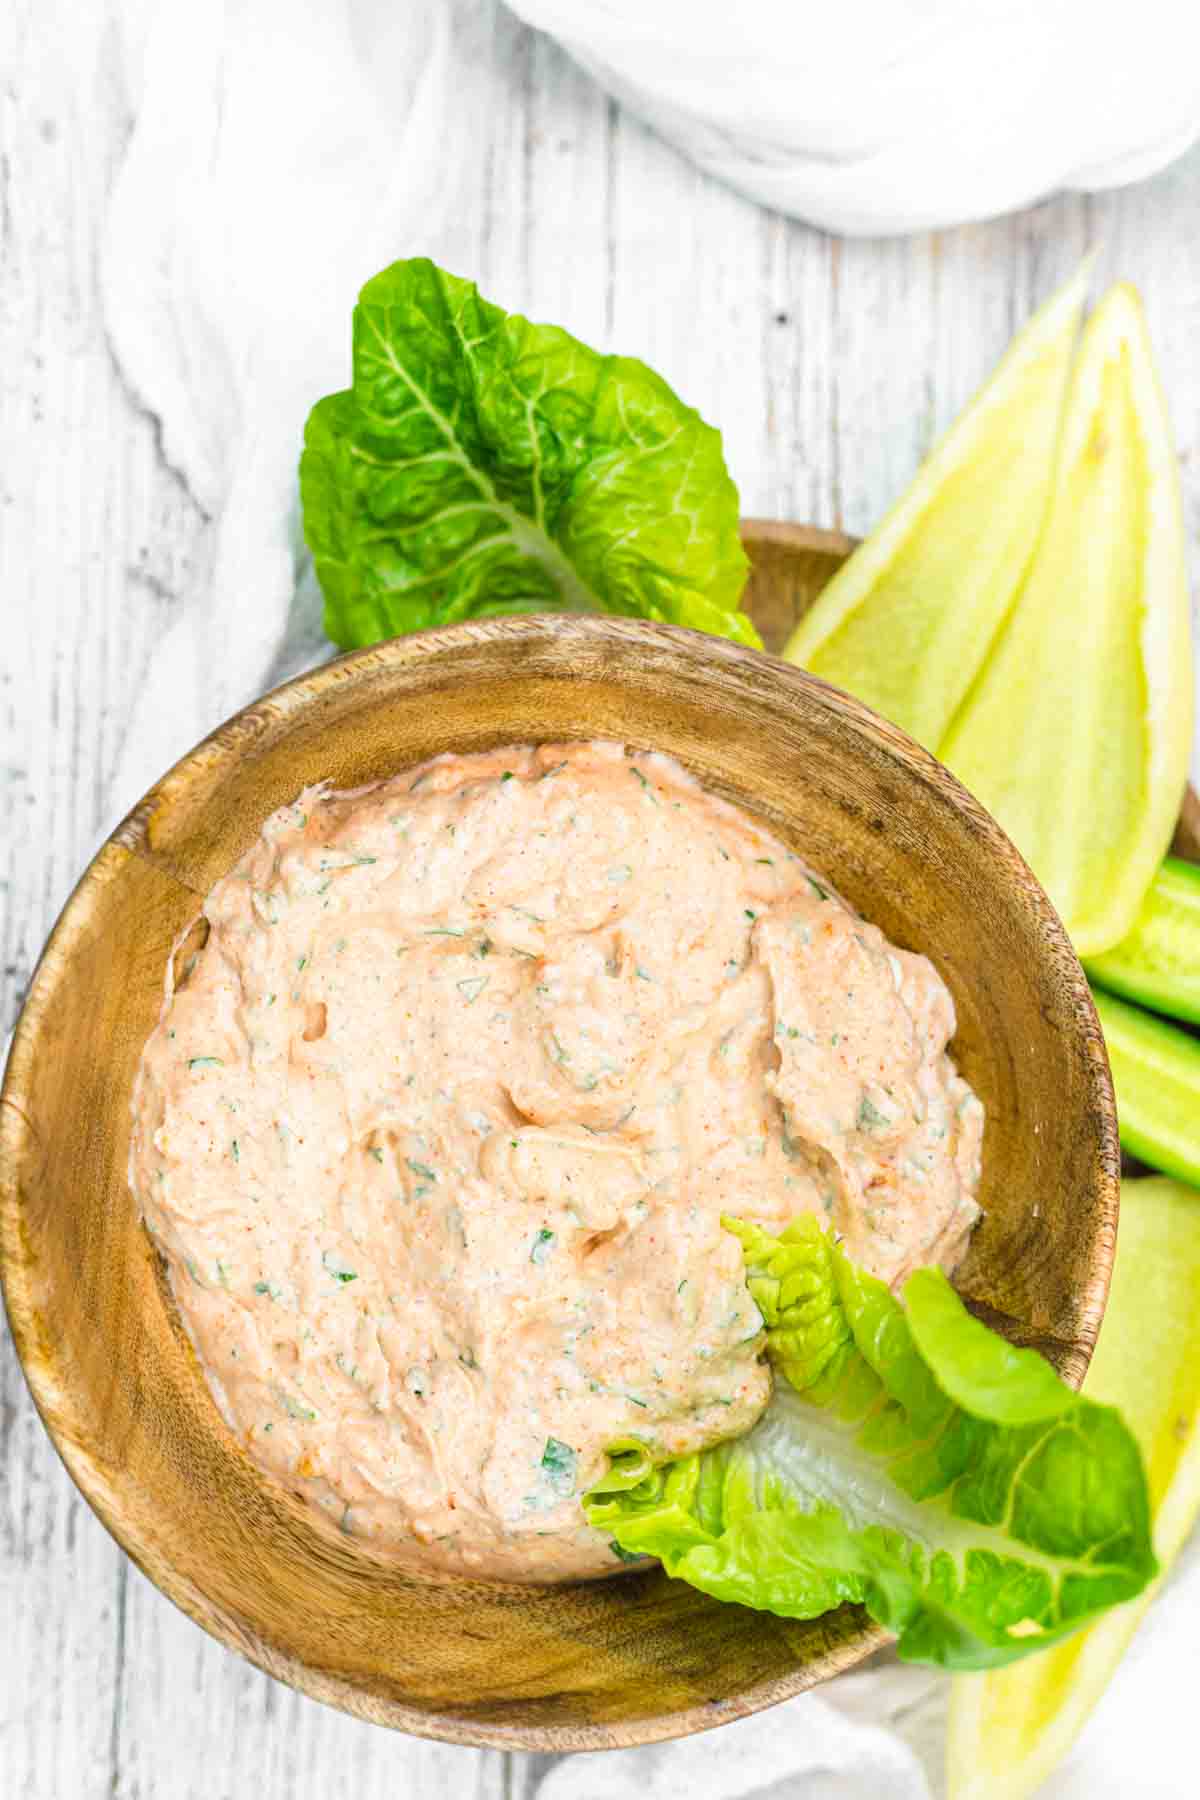 A bowl of creamy dip with herbs served with fresh lettuce on a wooden background.